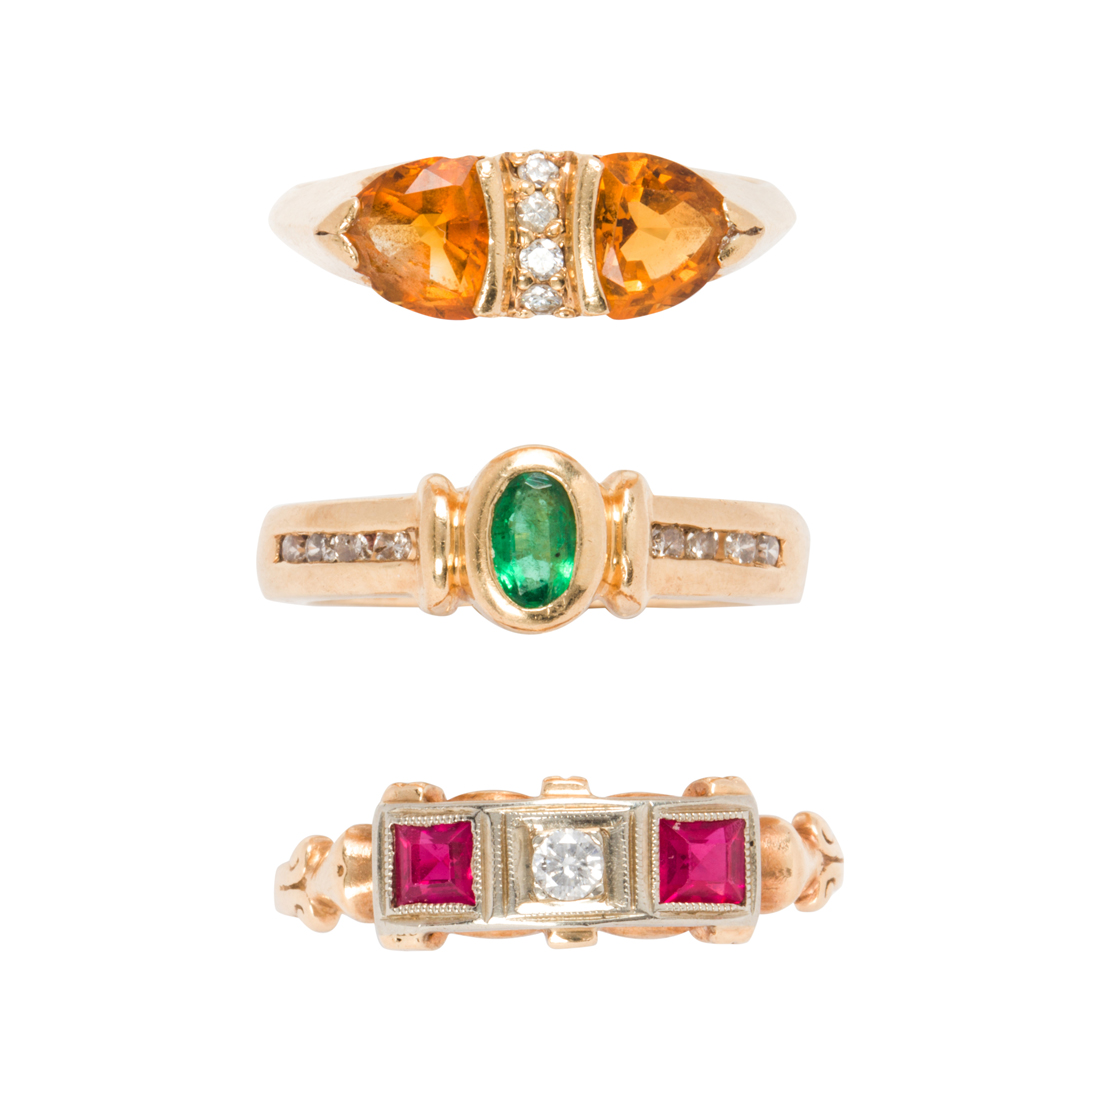 A GROUP OF THREE GEM-SET AND 14K